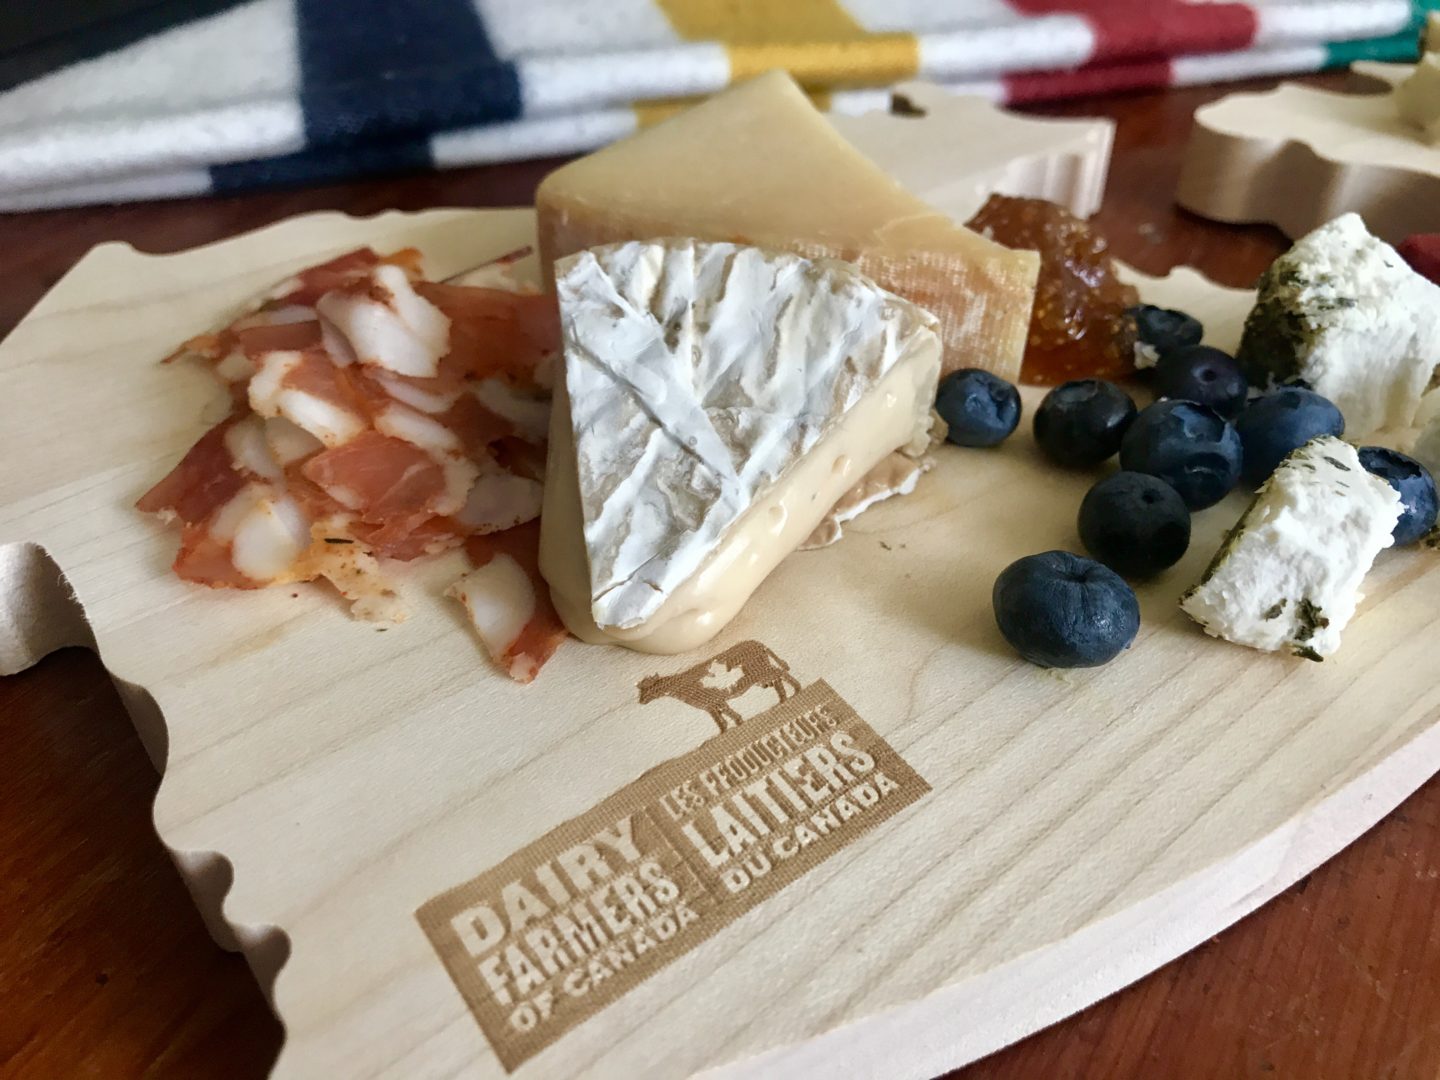 Hand cut Charcuterie from Drake Commissary, Comox Camembert, Natural Pastures (British Columbia) + Avonlea Clothbound Cheddar, Cows Creamery (Prince Edward Island), Muskoka made Fig jelly, Ontario blueberries